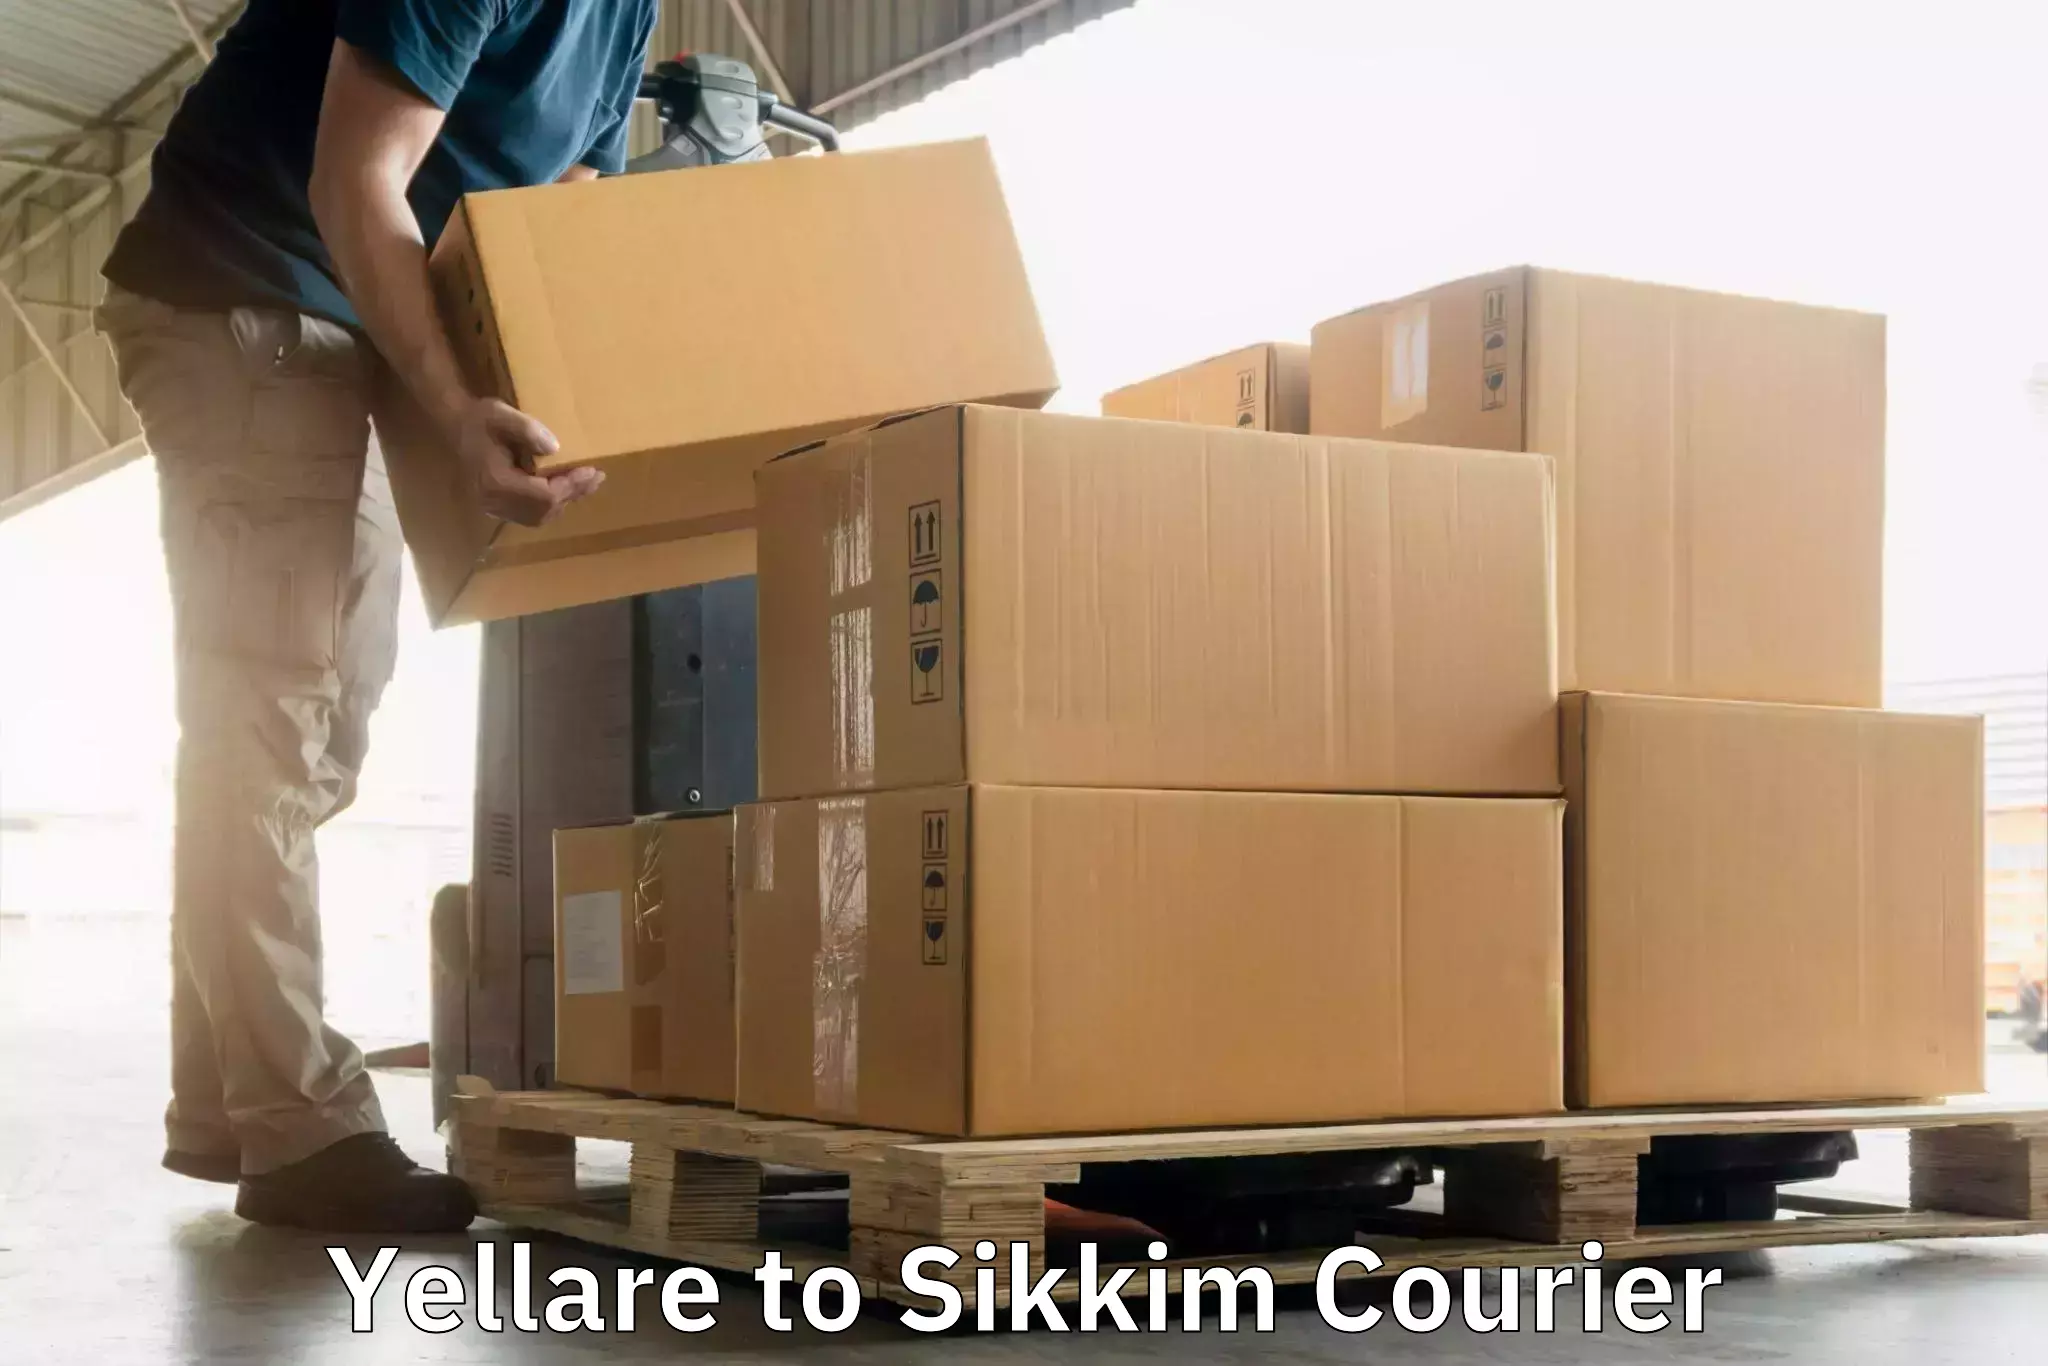 Track and trace shipping Yellare to Sikkim